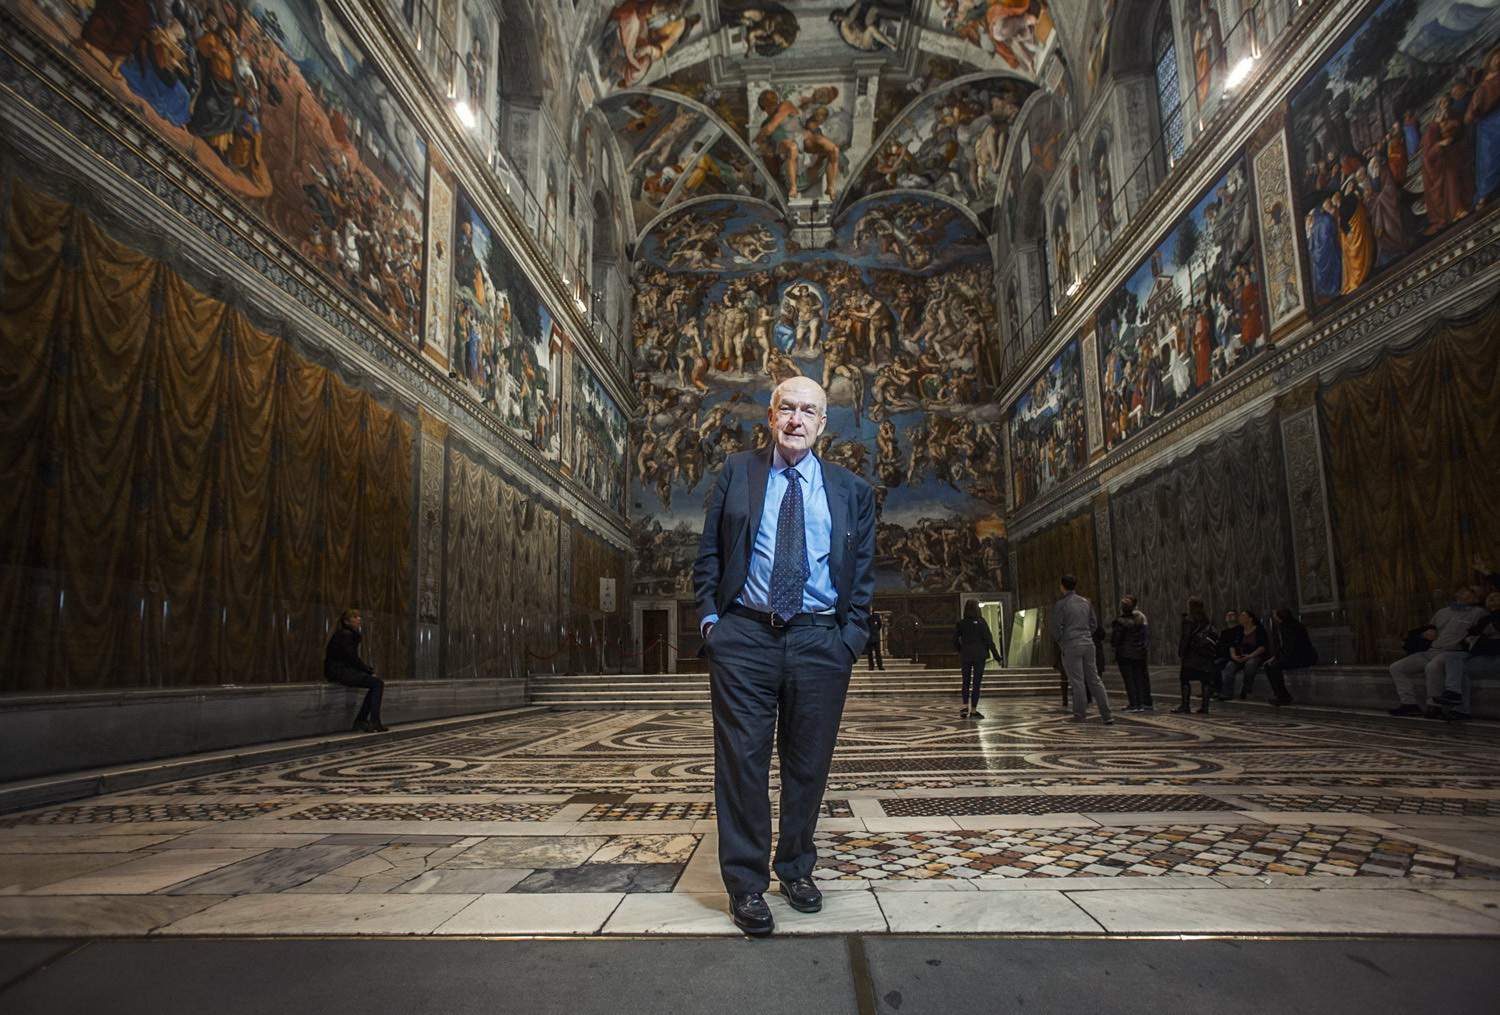 Art on TV June 8-14: Christo, Vatican Museums told by Paolucci, Nazis and stolen art